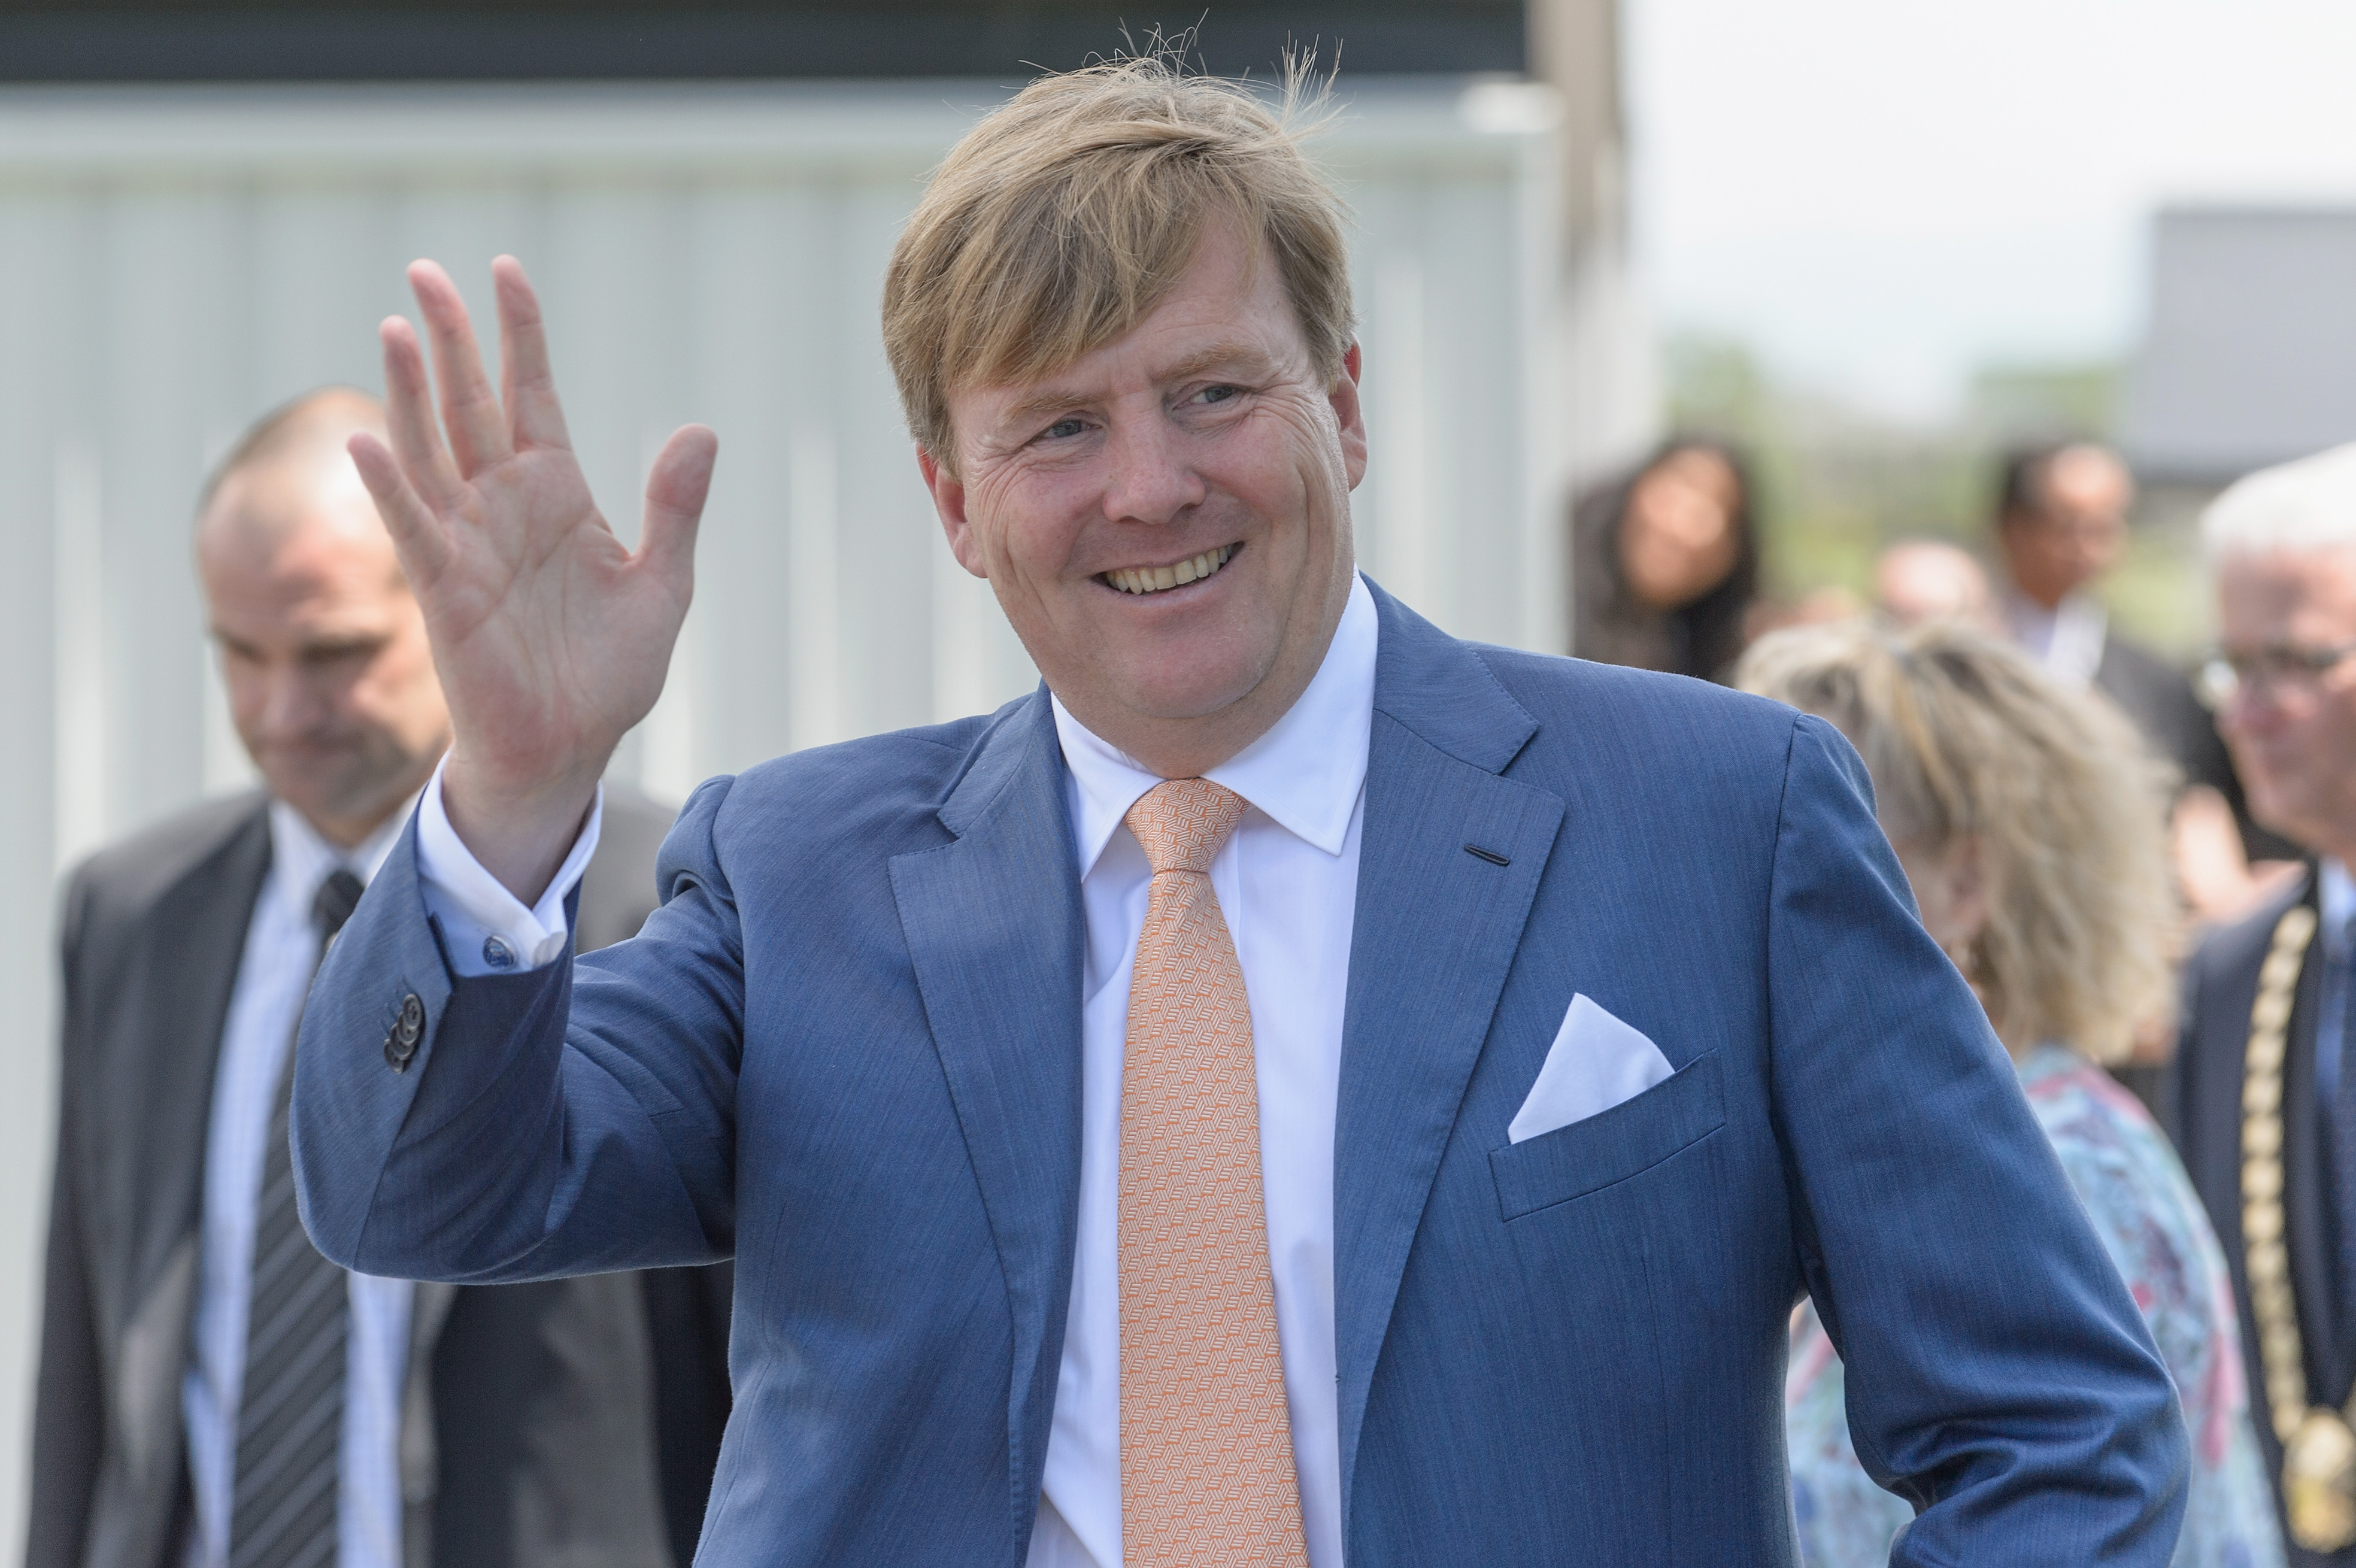 King Willem-Alexander And Queen Maxima Of The Netherlands Visit New Zealand